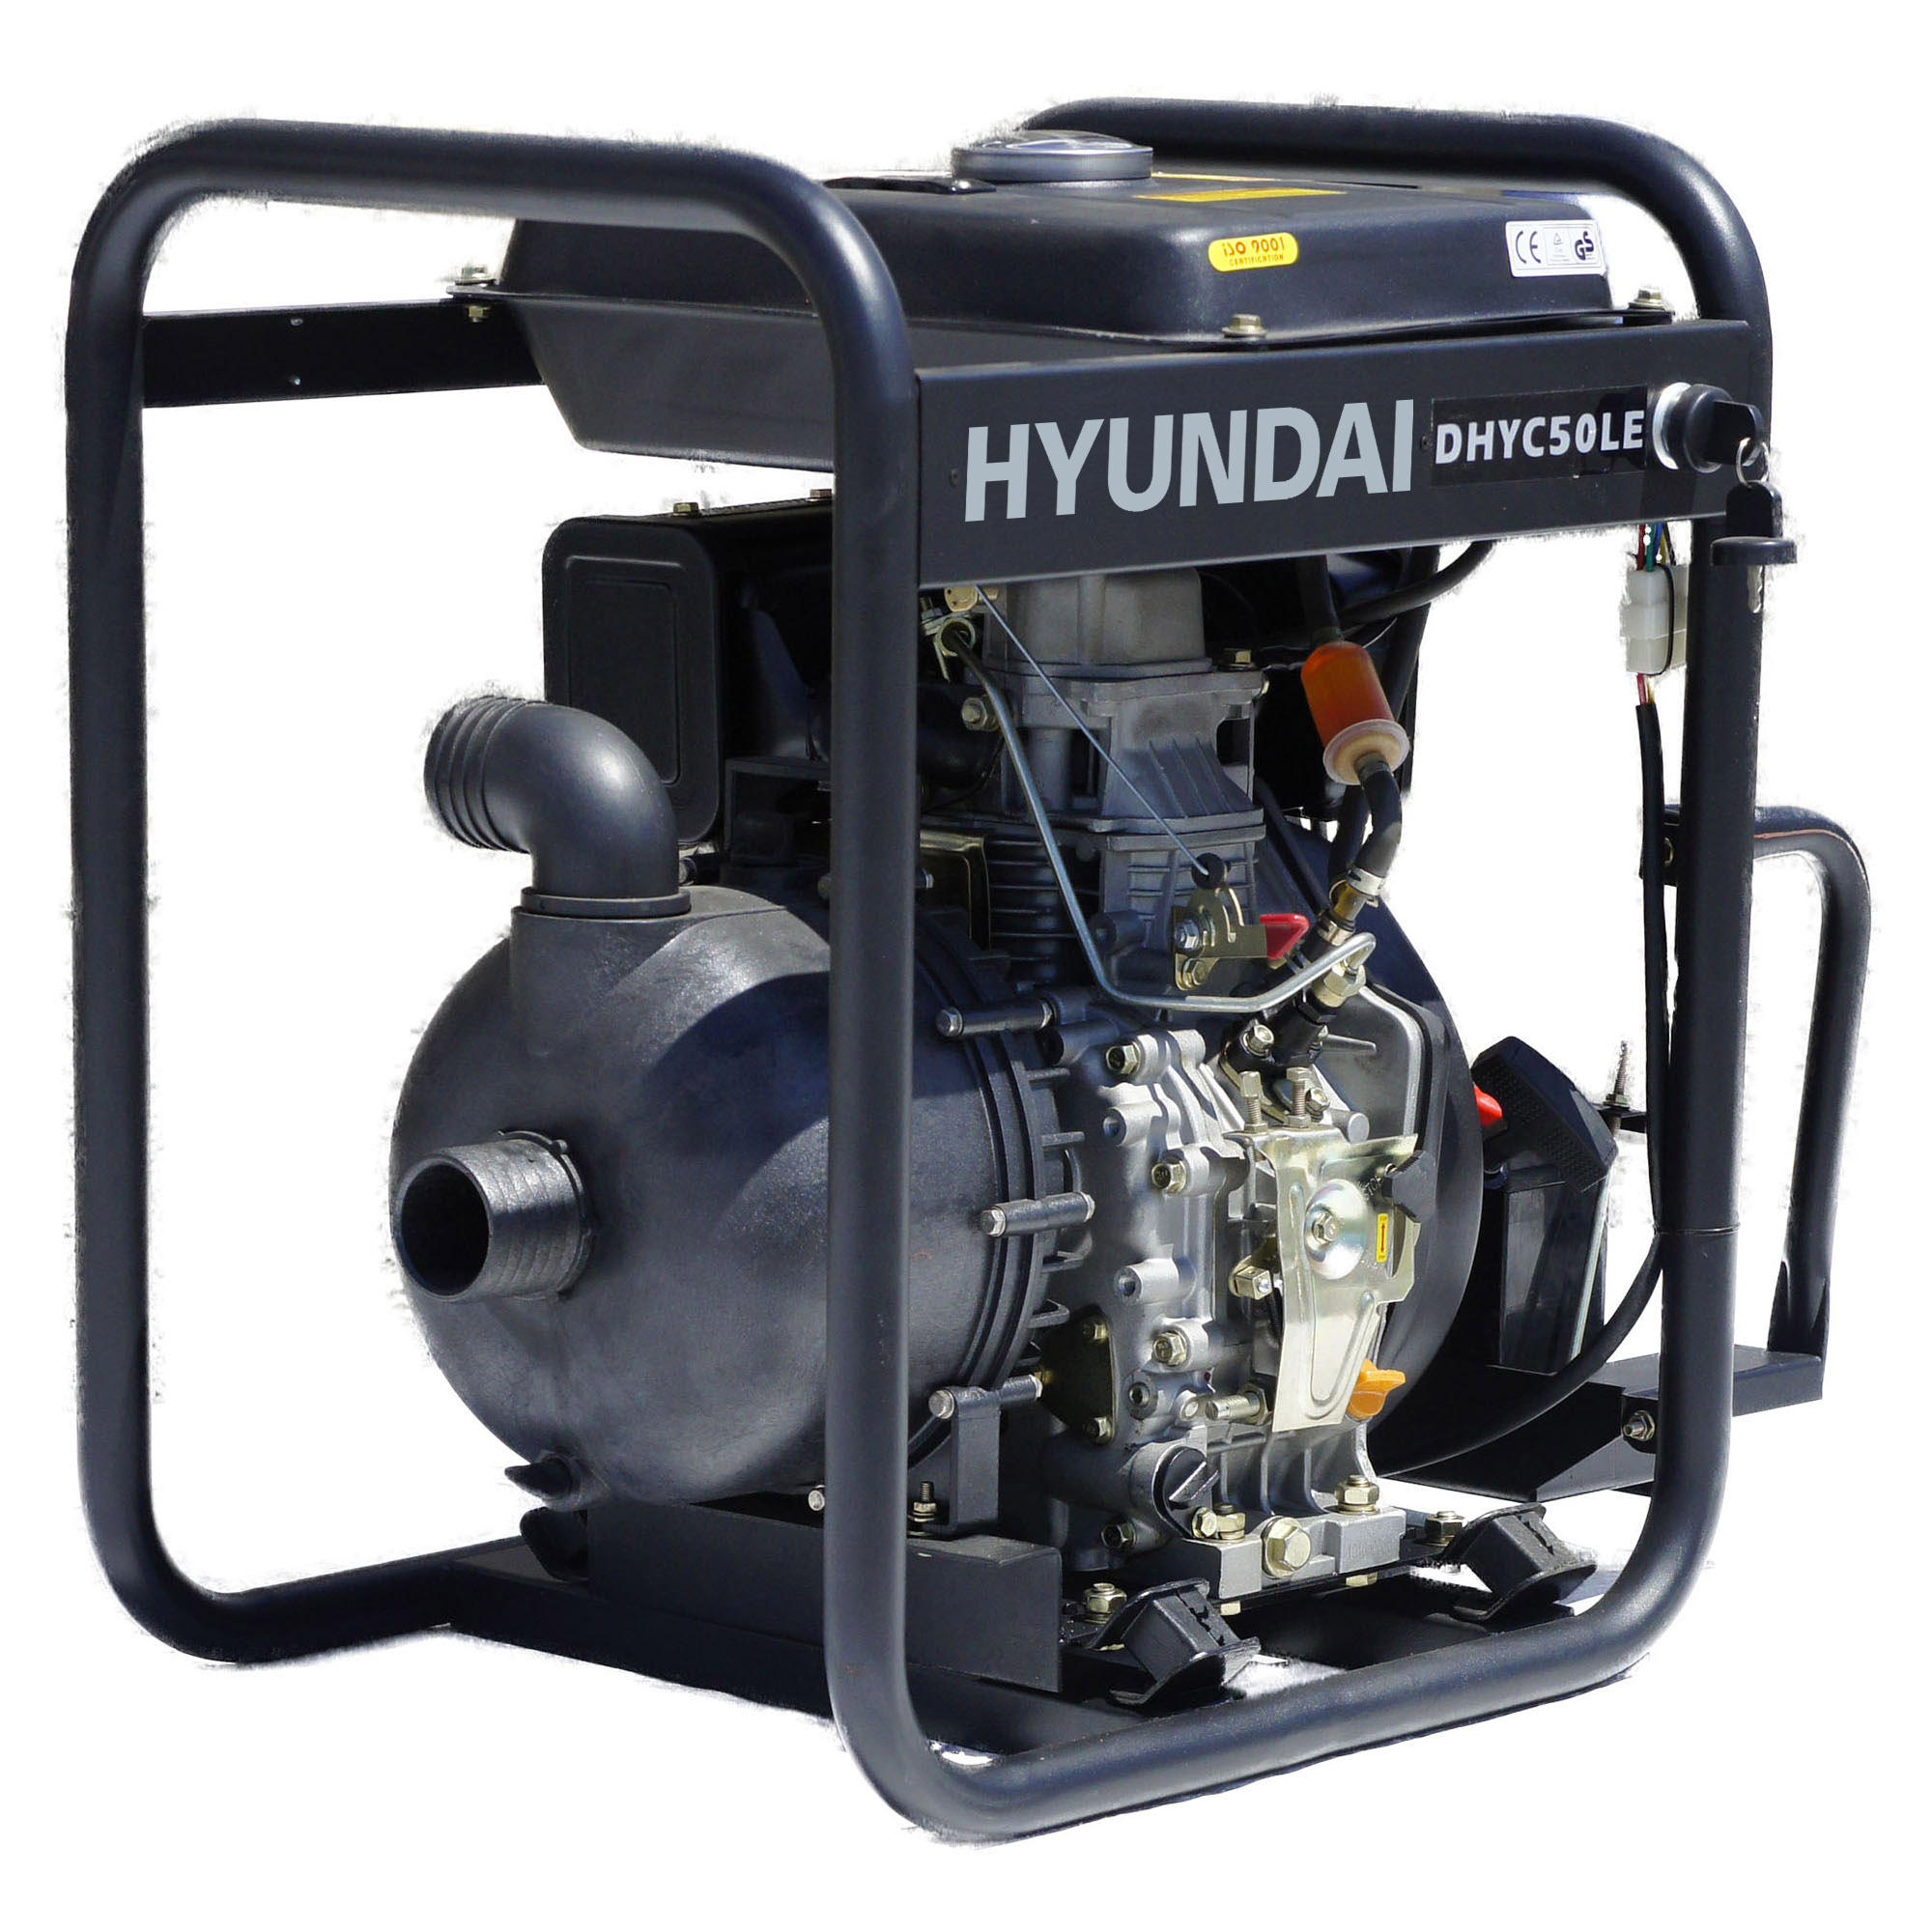 UK Suppliers Hyundai DHYC50LE 50mm 2? Electric Start Diesel Chemical Water Pump